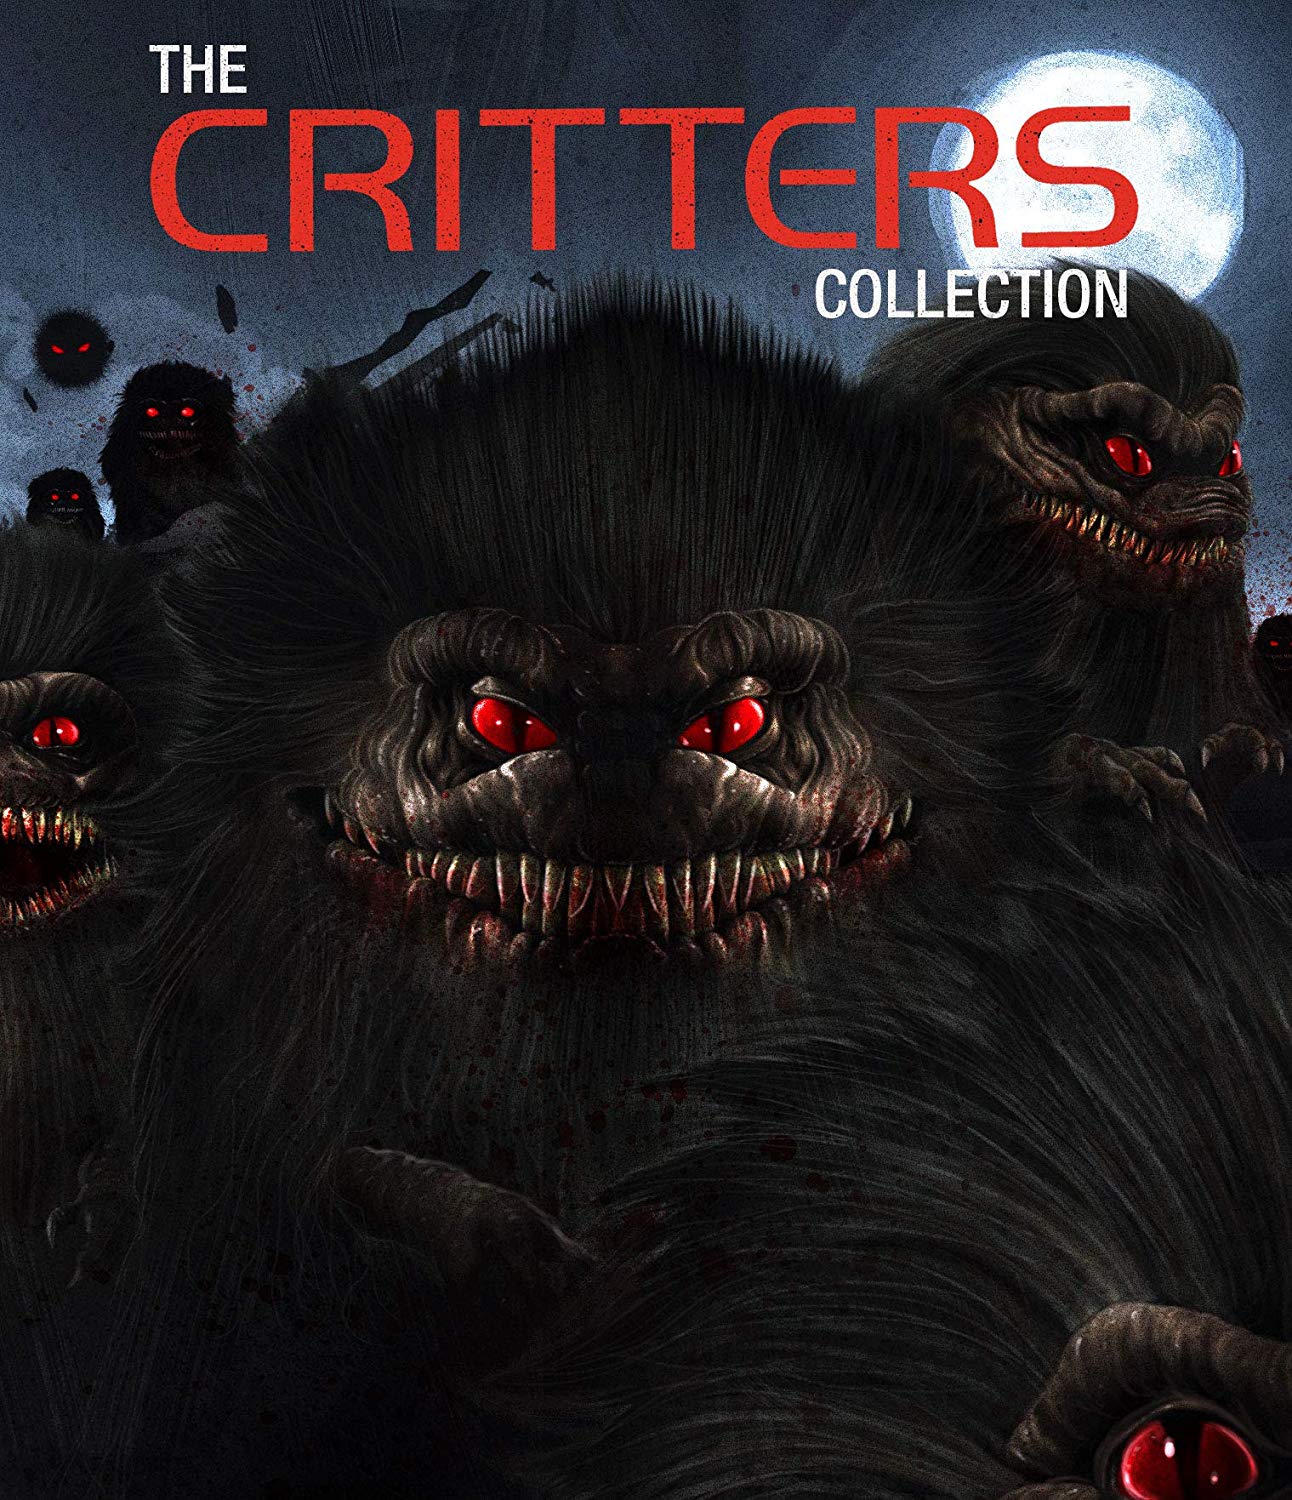 the critters collection blu-ray